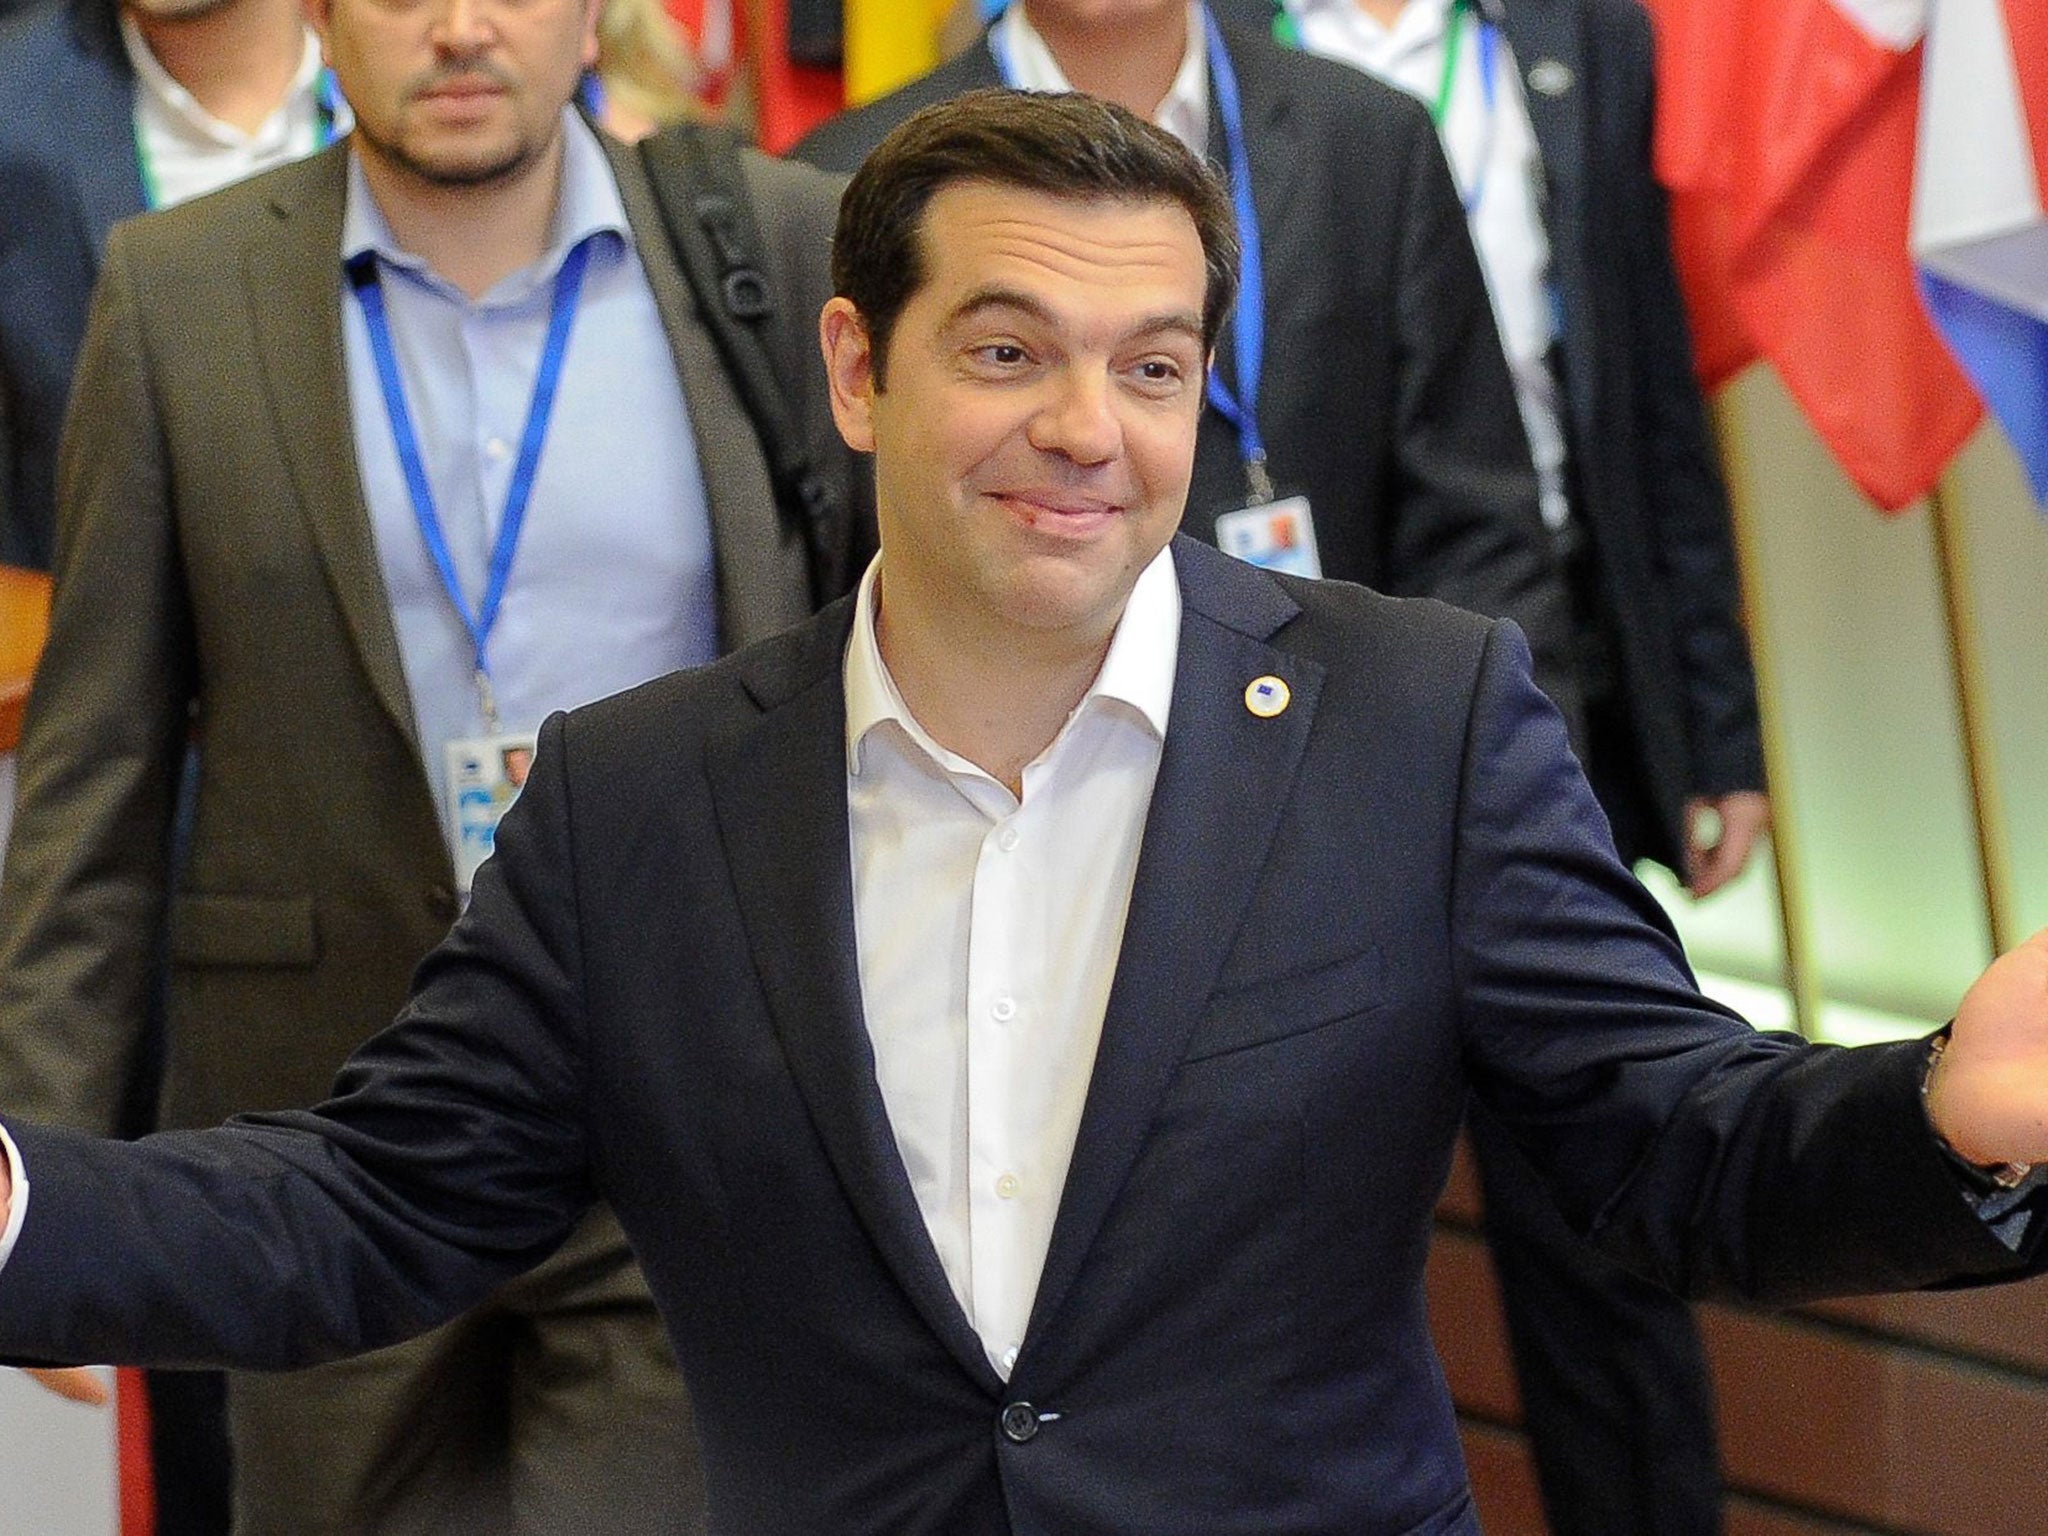 Greek Prime Minister Alexis Tsipras leaving at the end of an Eurozone summit at the European Council headquarters in Brussels